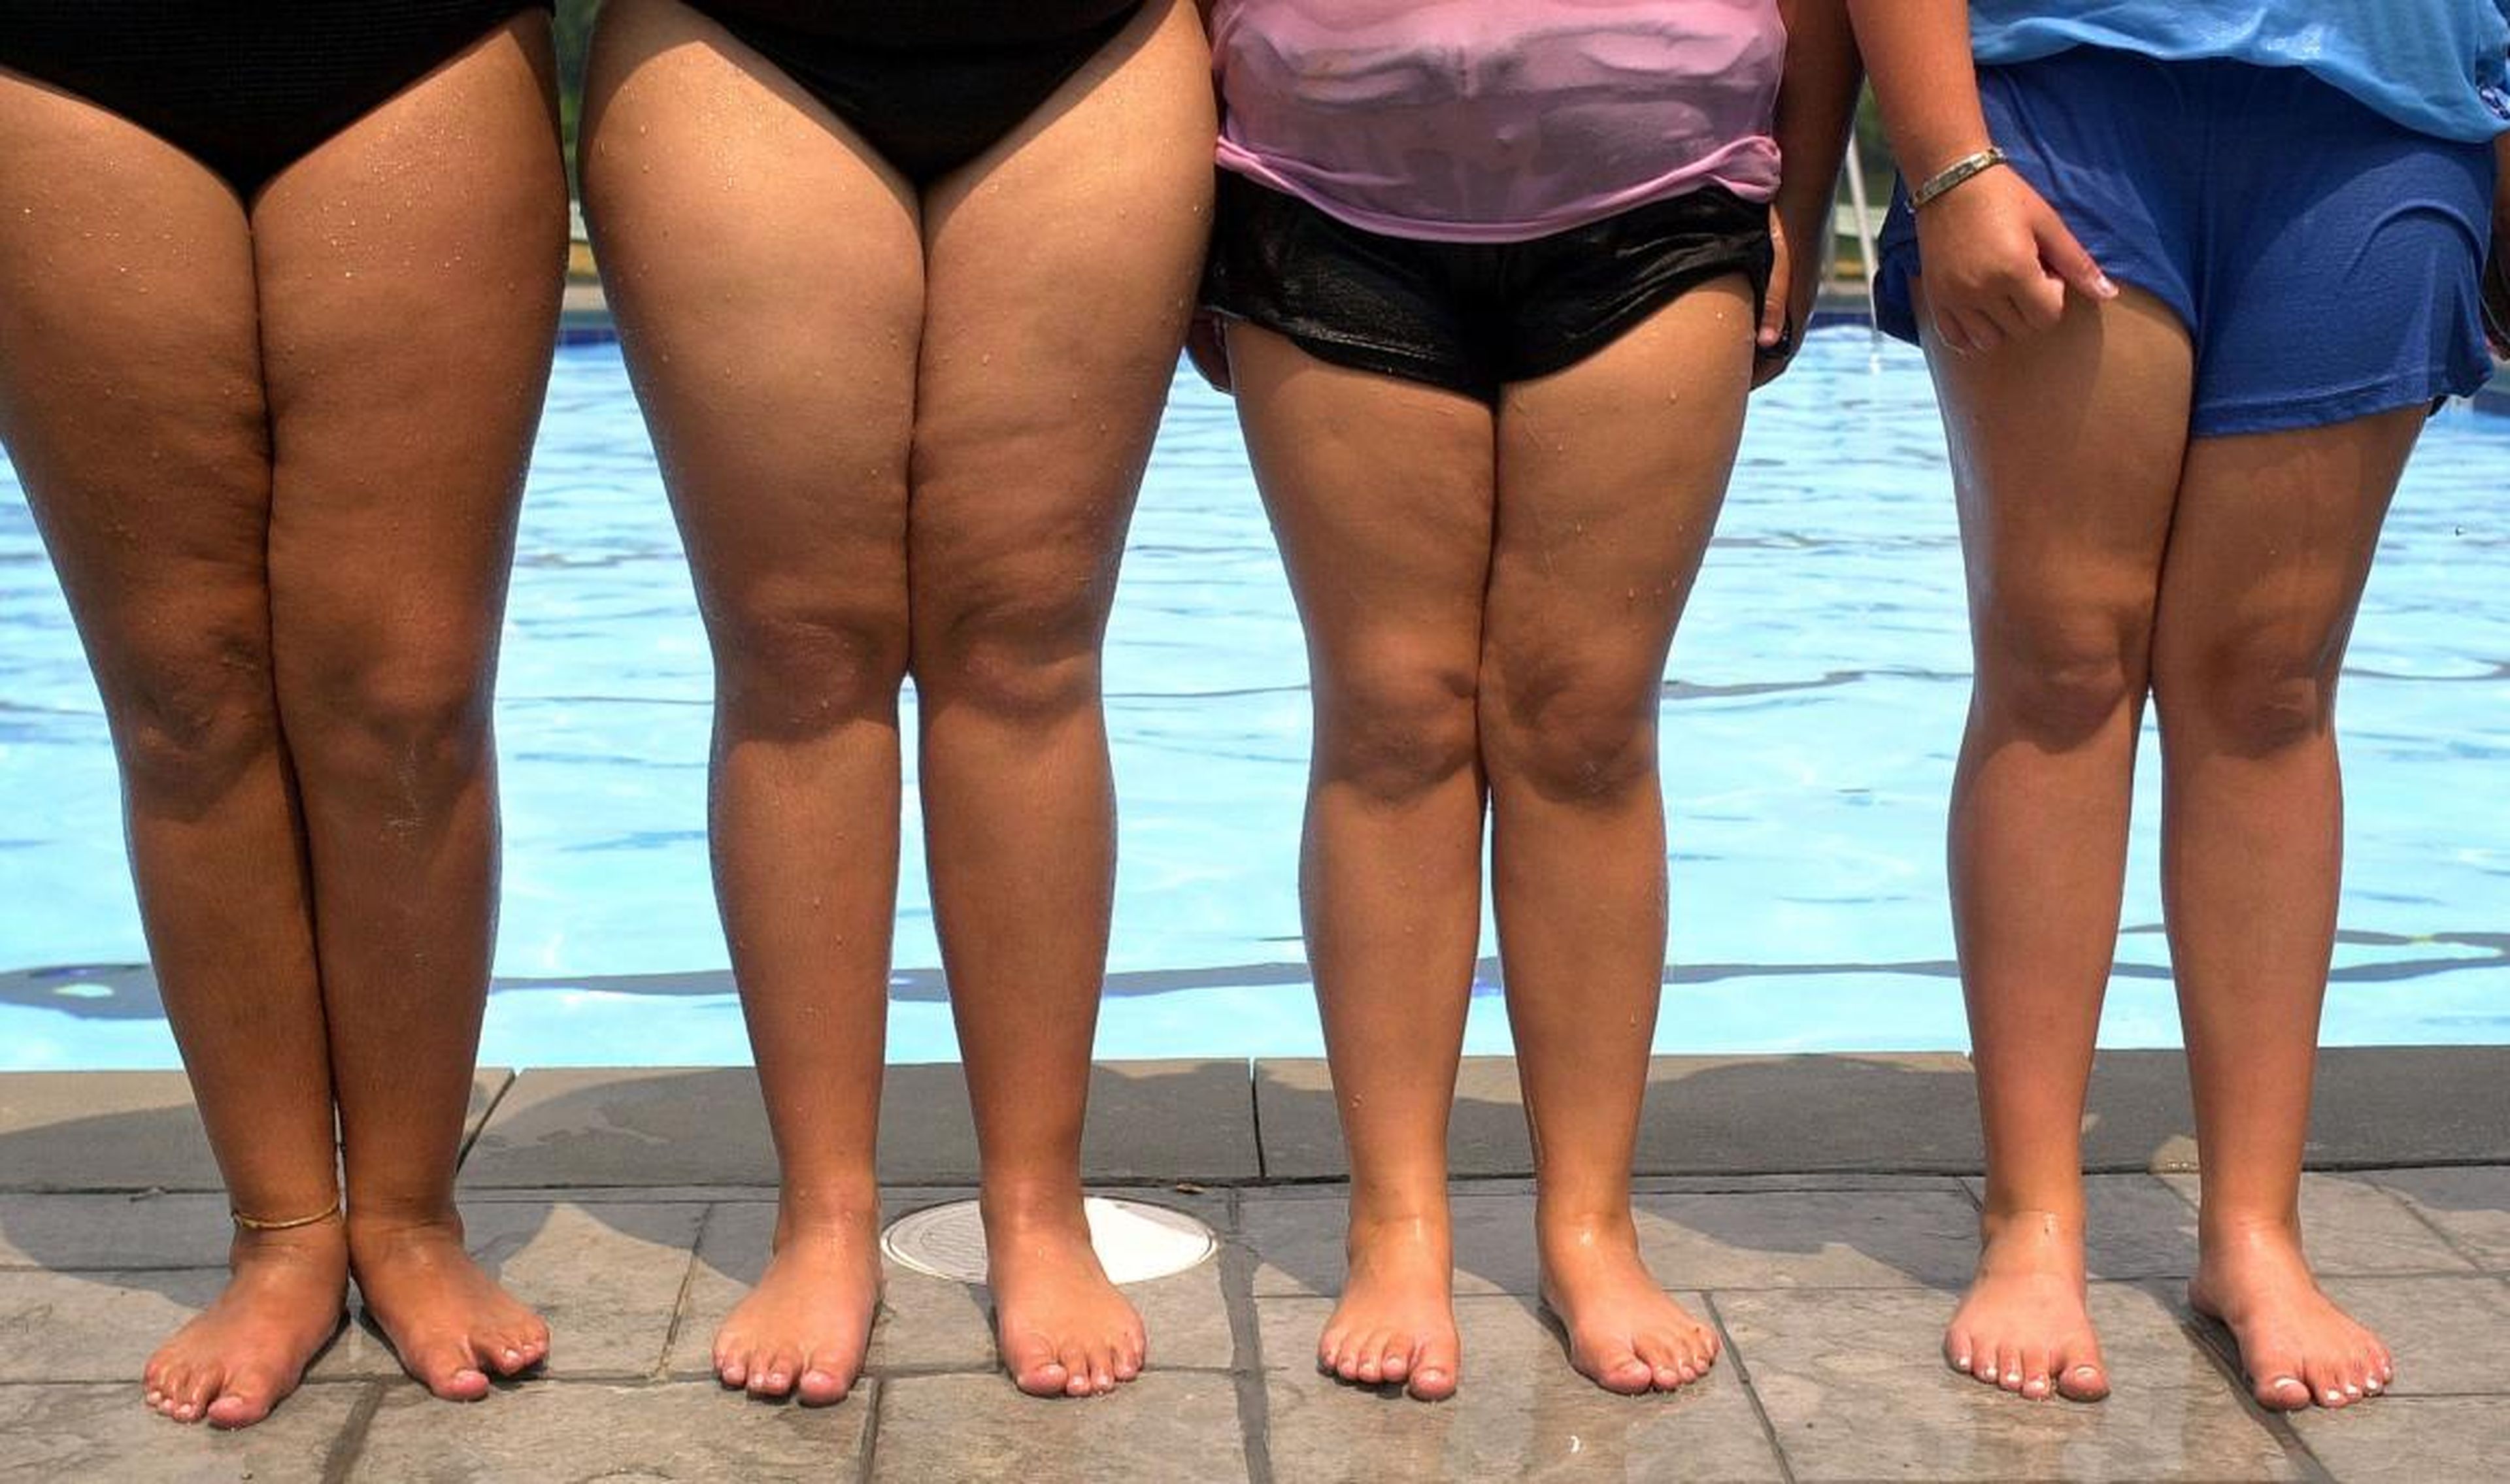 But some obesity-related cancer rates are soaring in young people, and doctors are worried it's a troubling sign of what's to come.